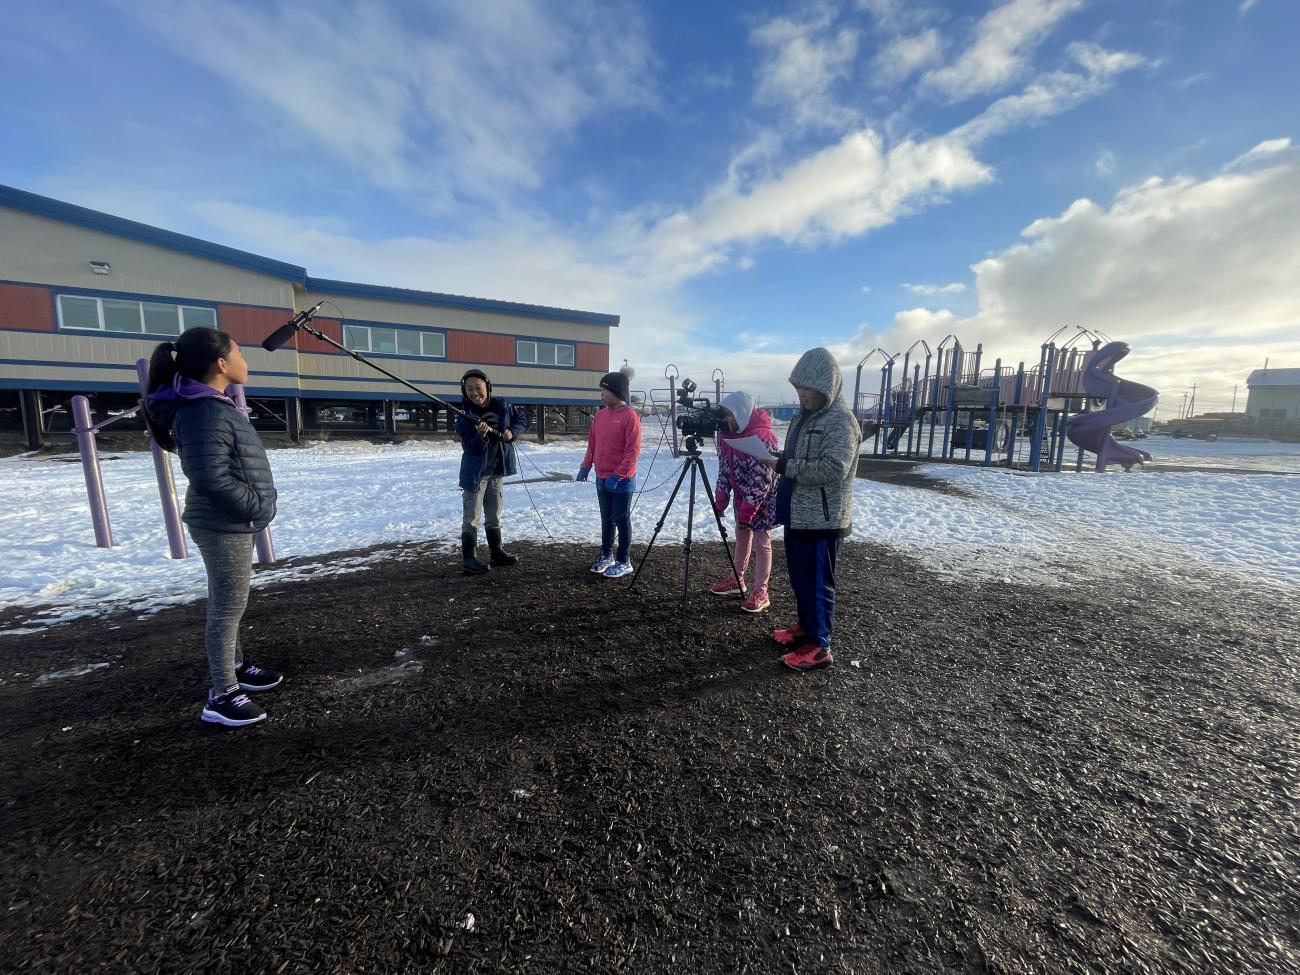 Students film a peer in front of the Chevak school and playground. — Credit: Seth Bader, See Stories